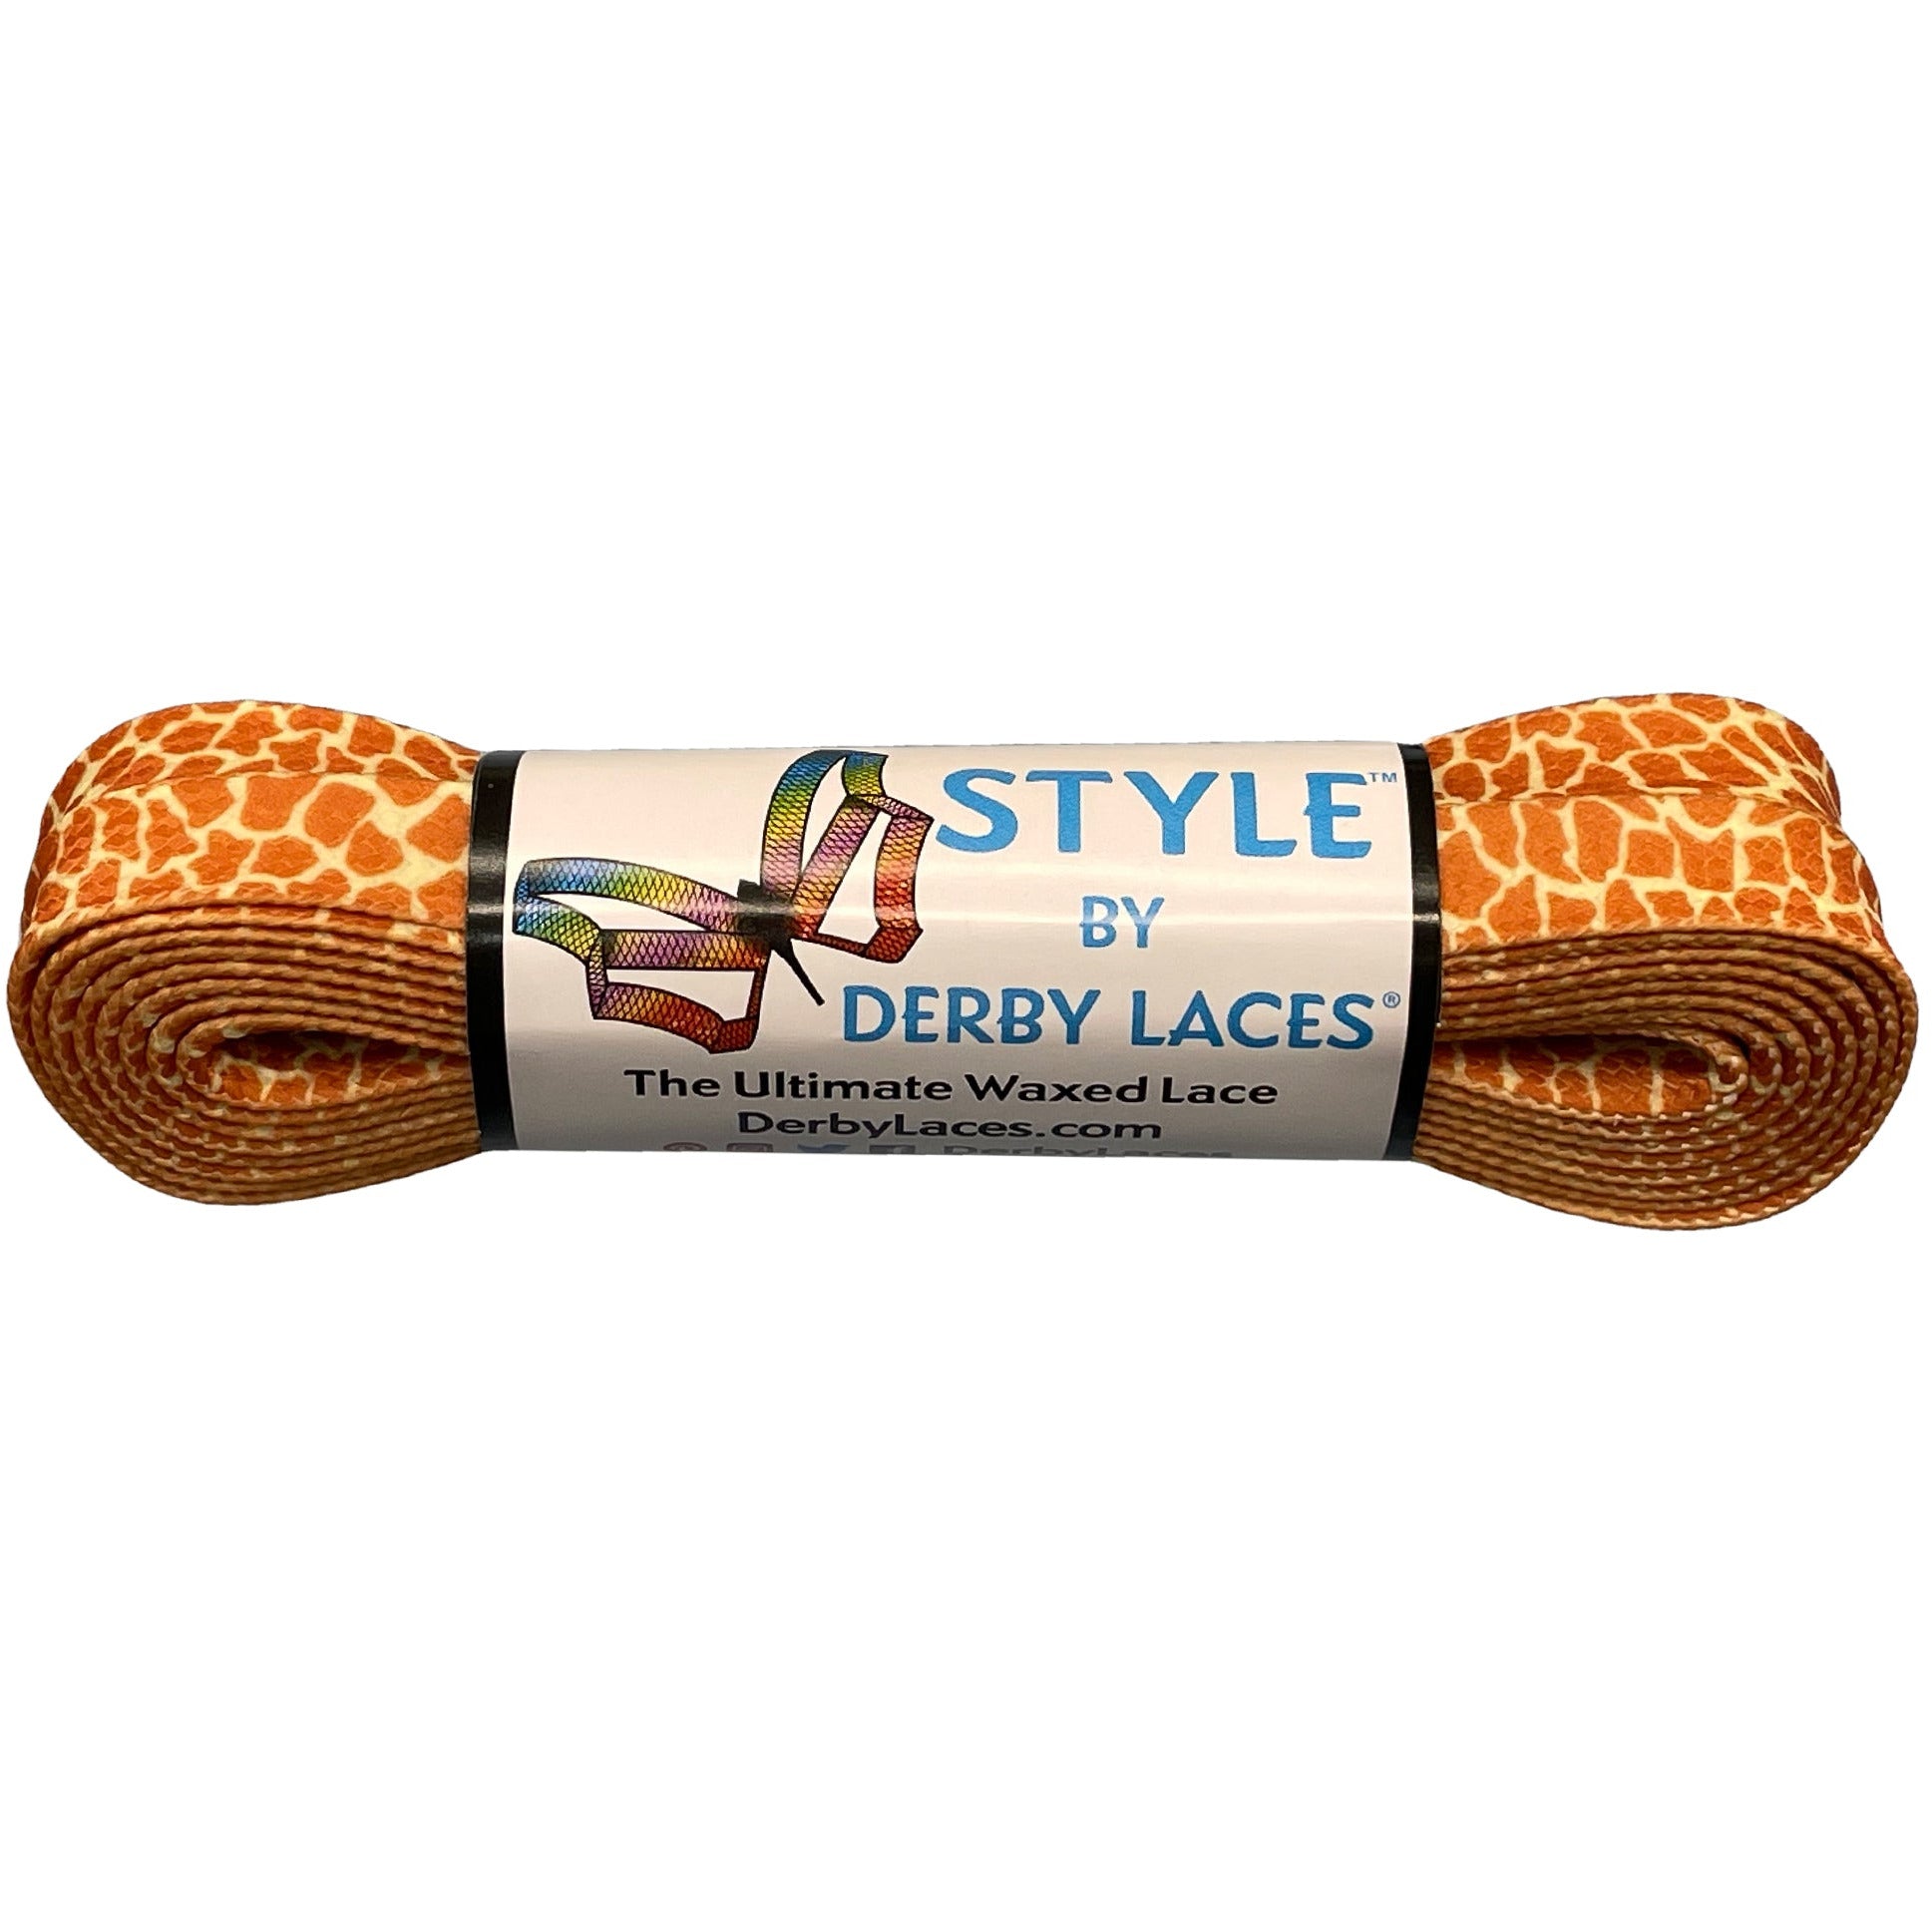 STYLE by Derby Laces – Giraffe 213cm